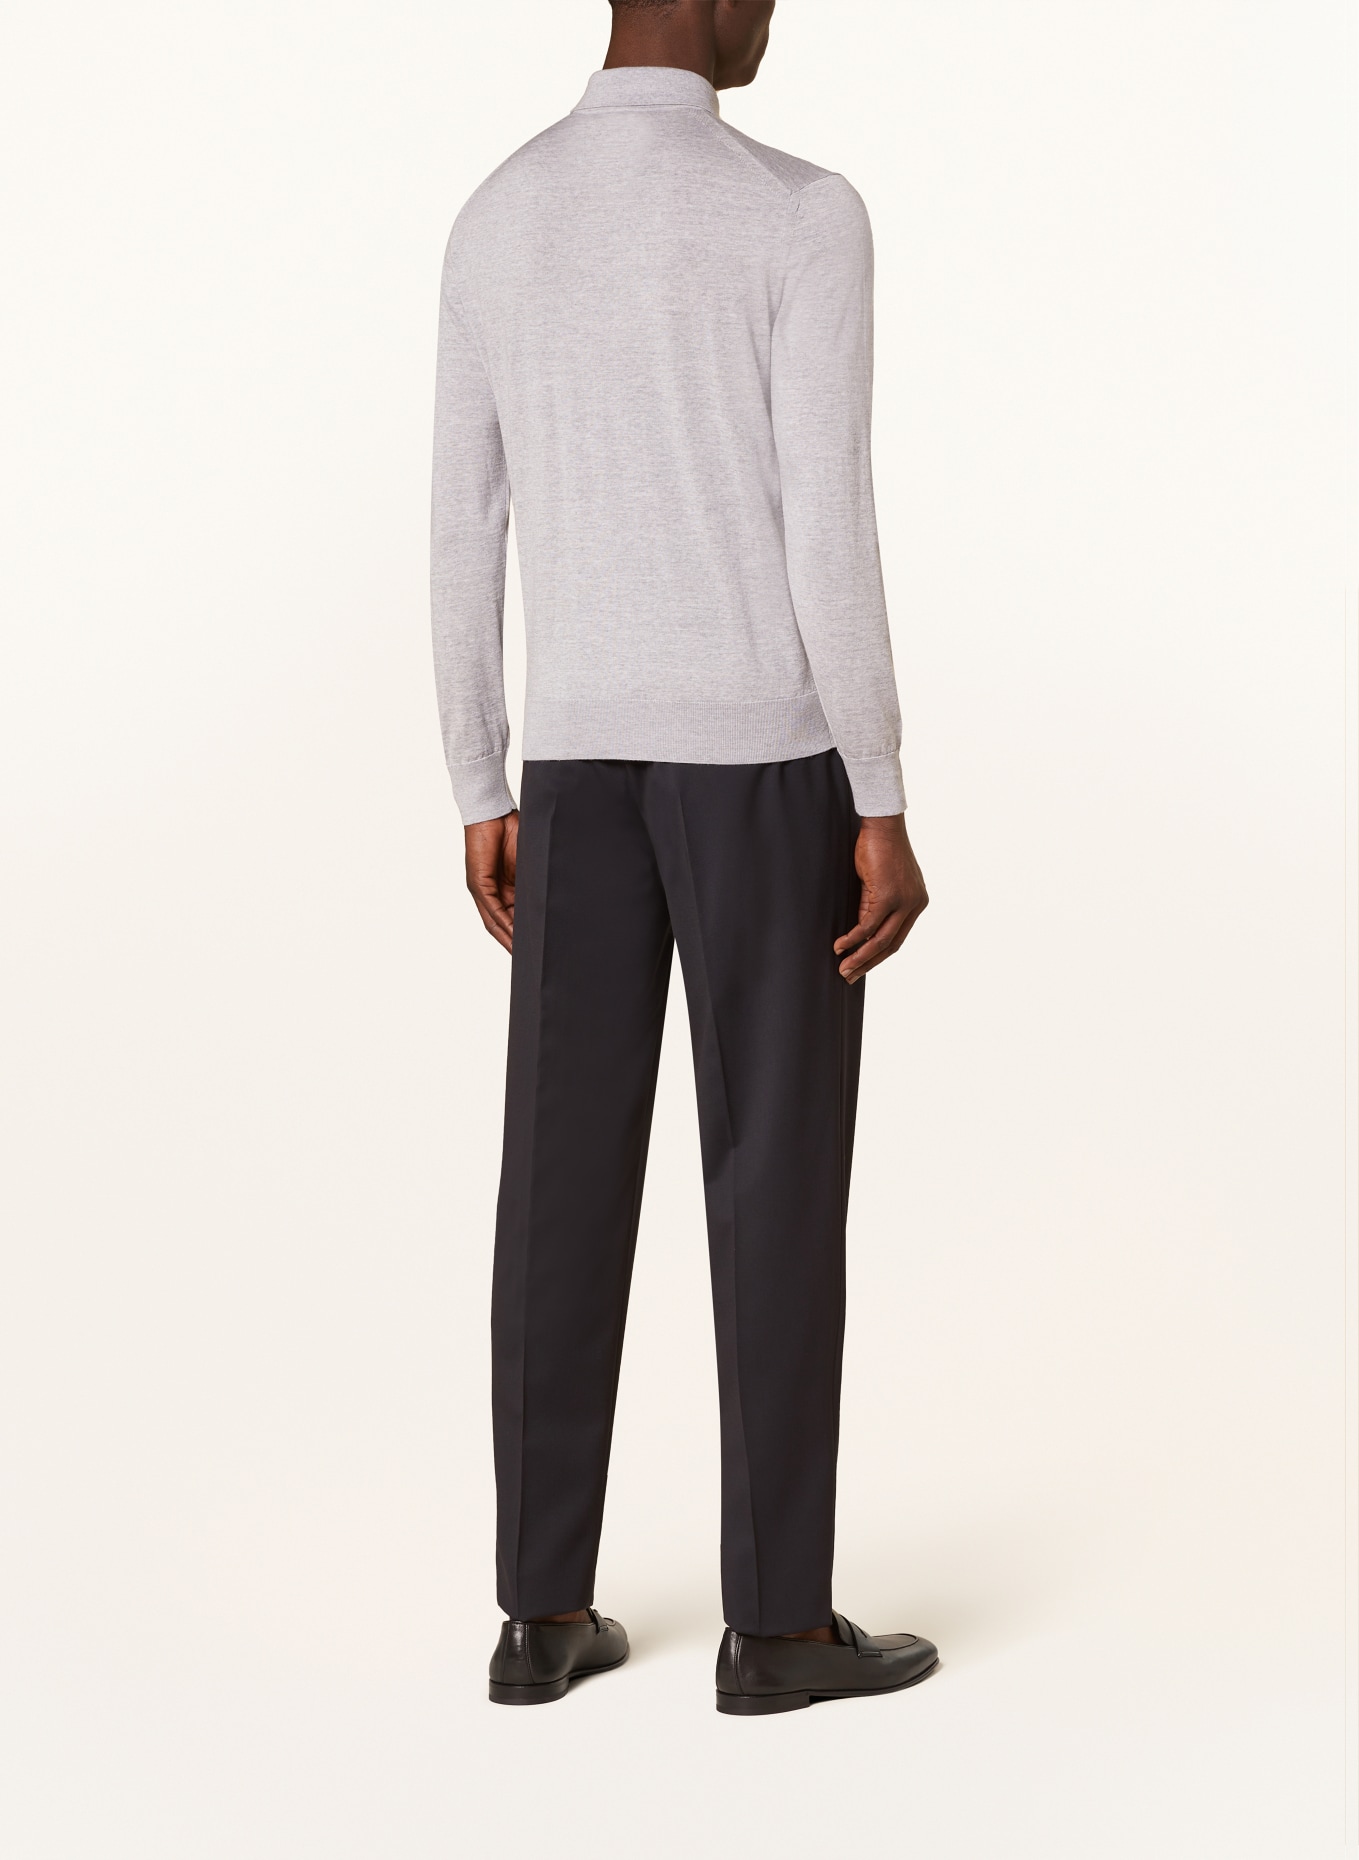 ZEGNA Sweater, Color: LIGHT GRAY (Image 3)